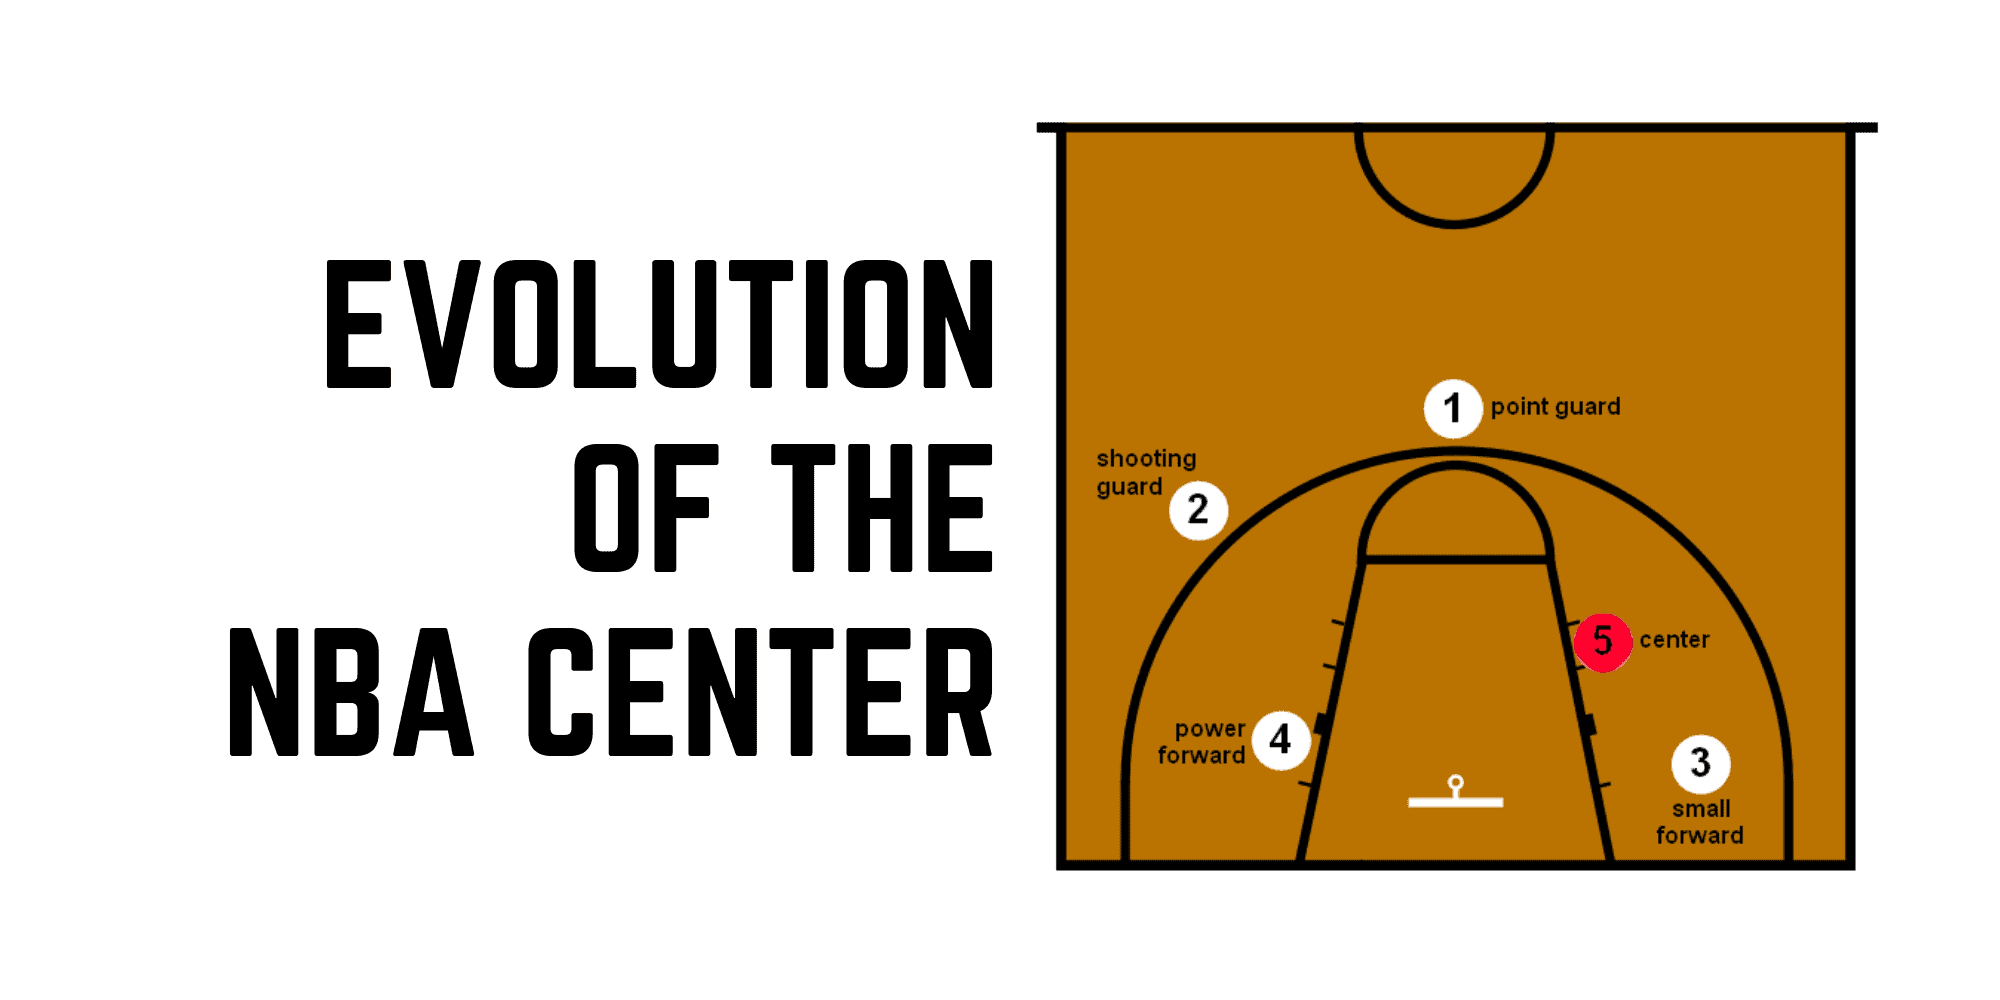 featured image for evolution of the nba centers article